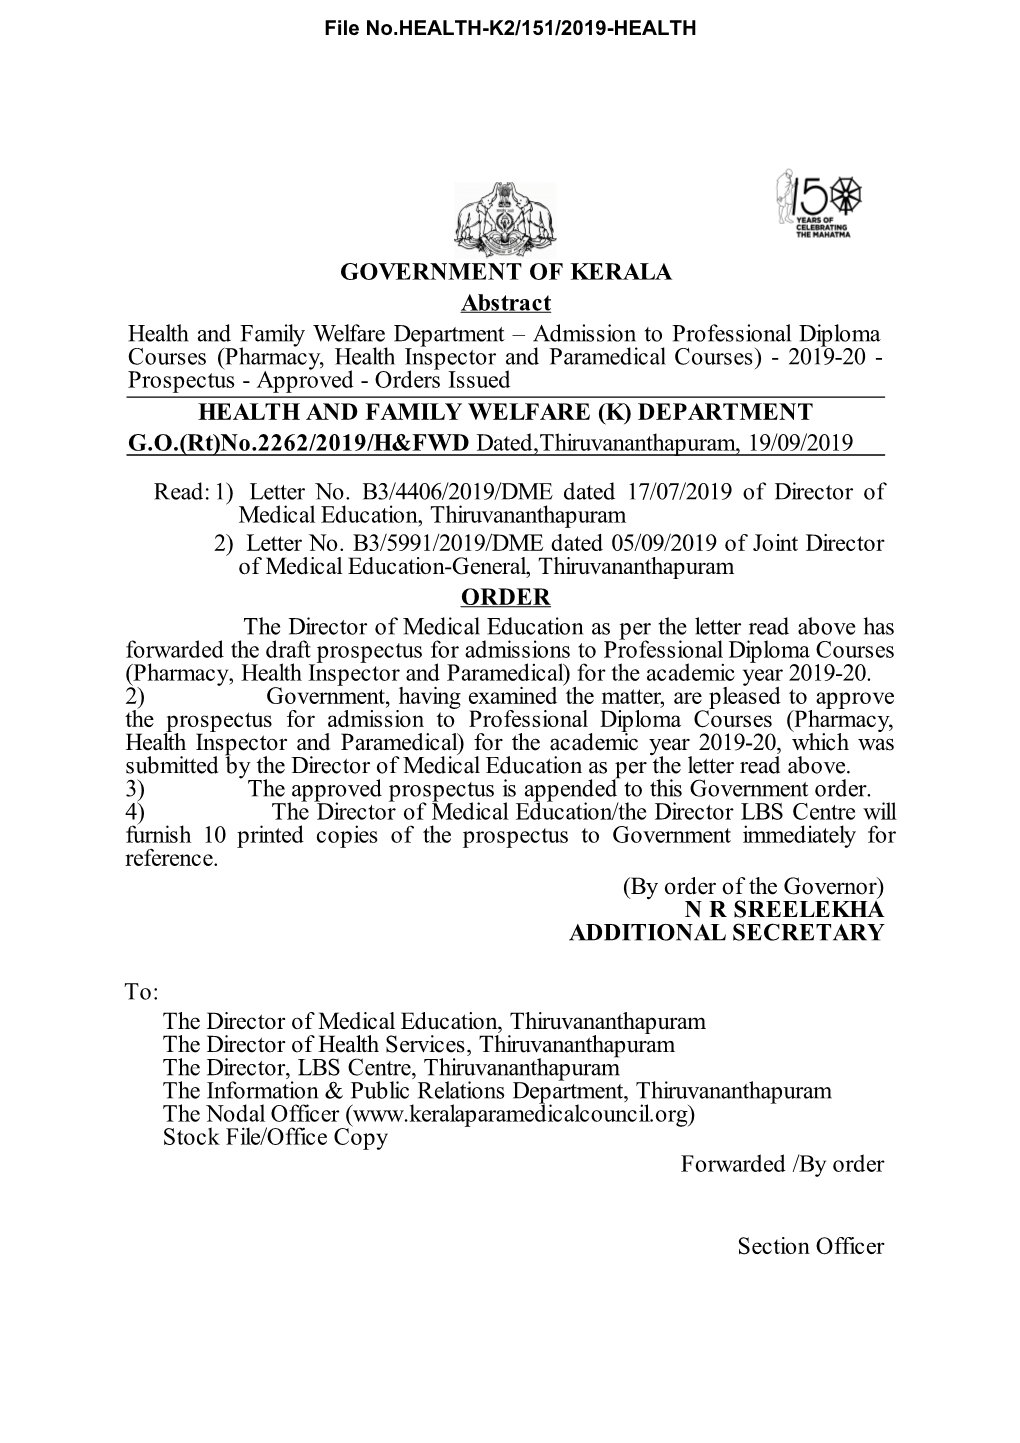 Prospectus - Approved - Orders Issued HEALTH and FAMILY WELFARE (K) DEPARTMENT G.O.(Rt)No.2262/2019/H&FWD Dated,Thiruvananthapuram, 19/09/2019 Read: 1) Letter No